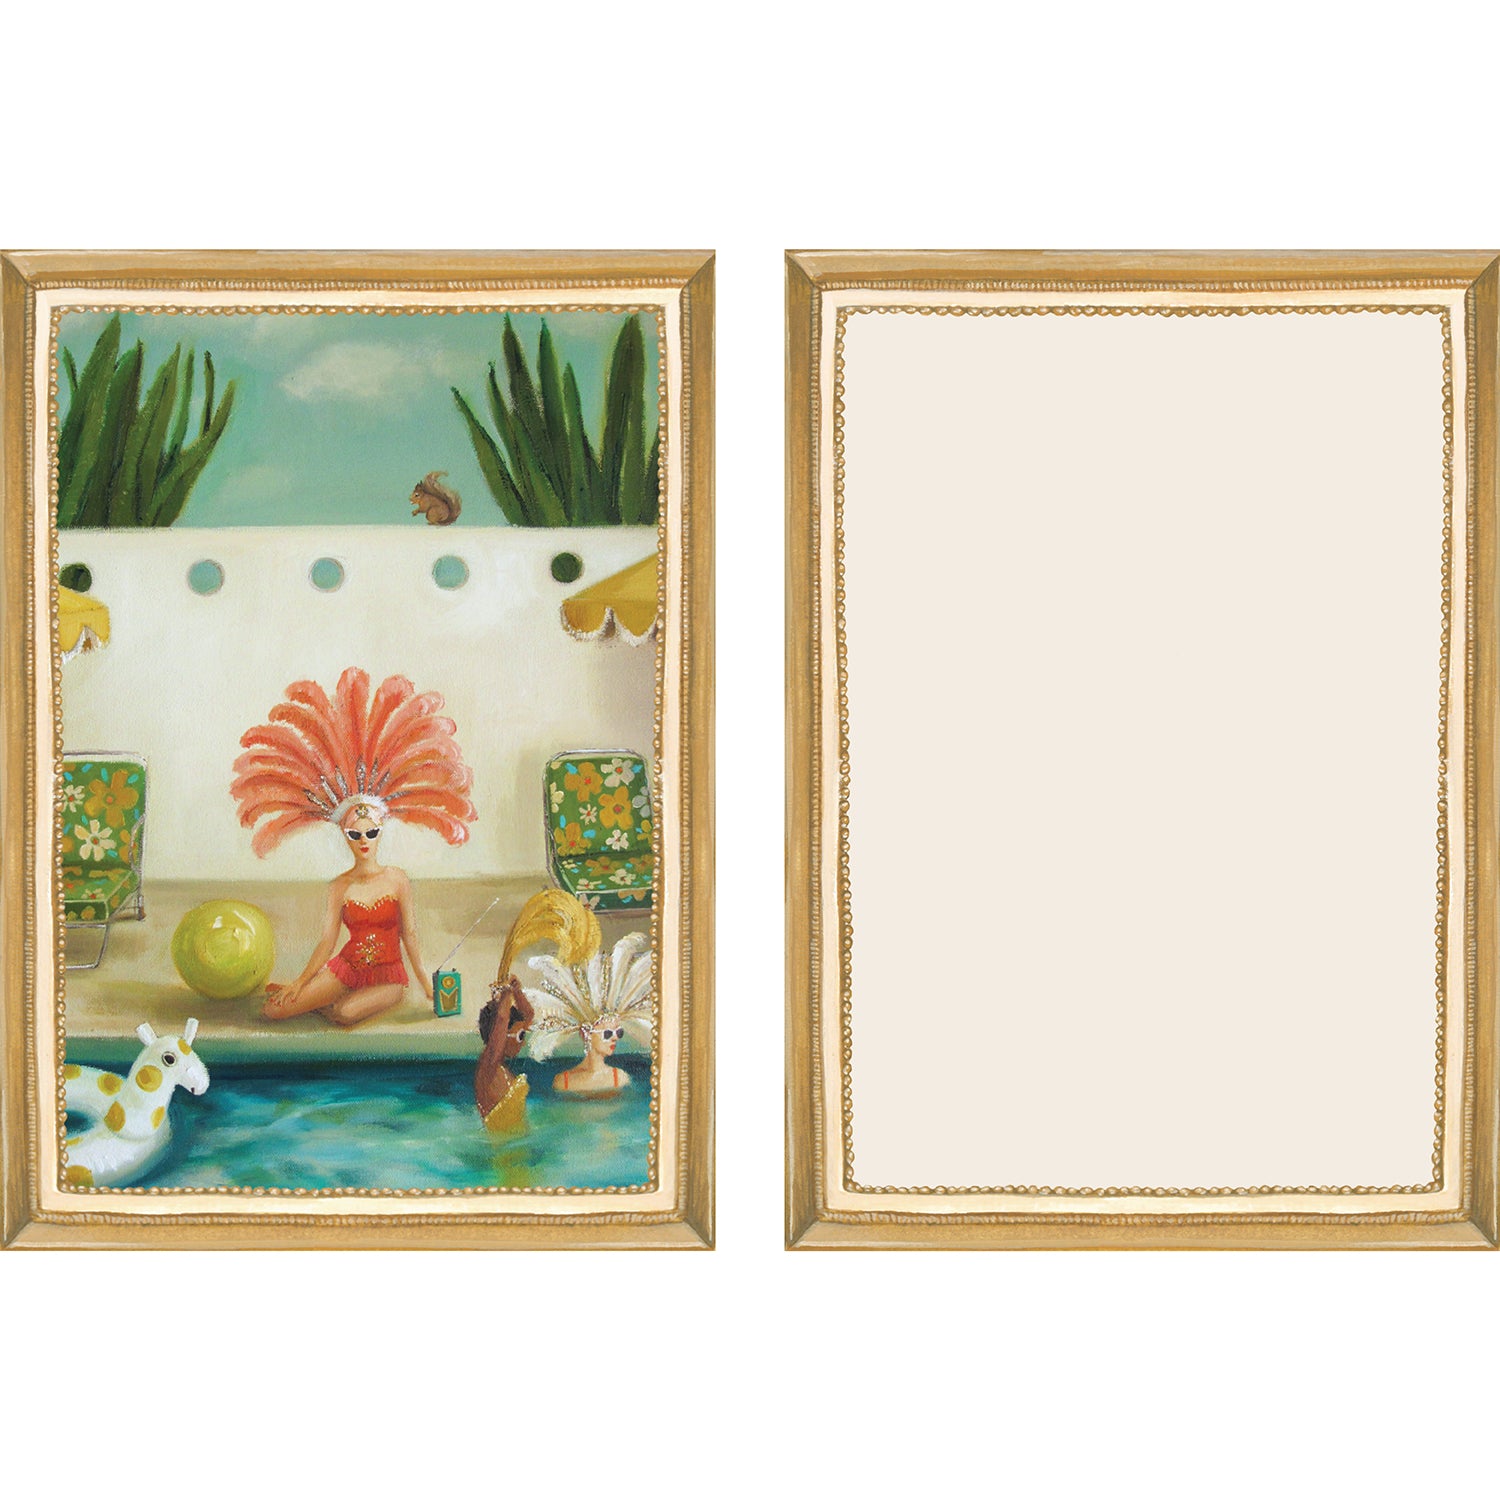 A pair of On Holiday Flat Note Boxed Set of 6 Cards pictures of a woman and a girl in a swimming pool, featuring luxurious Janet Hill vacation-inspired artwork.